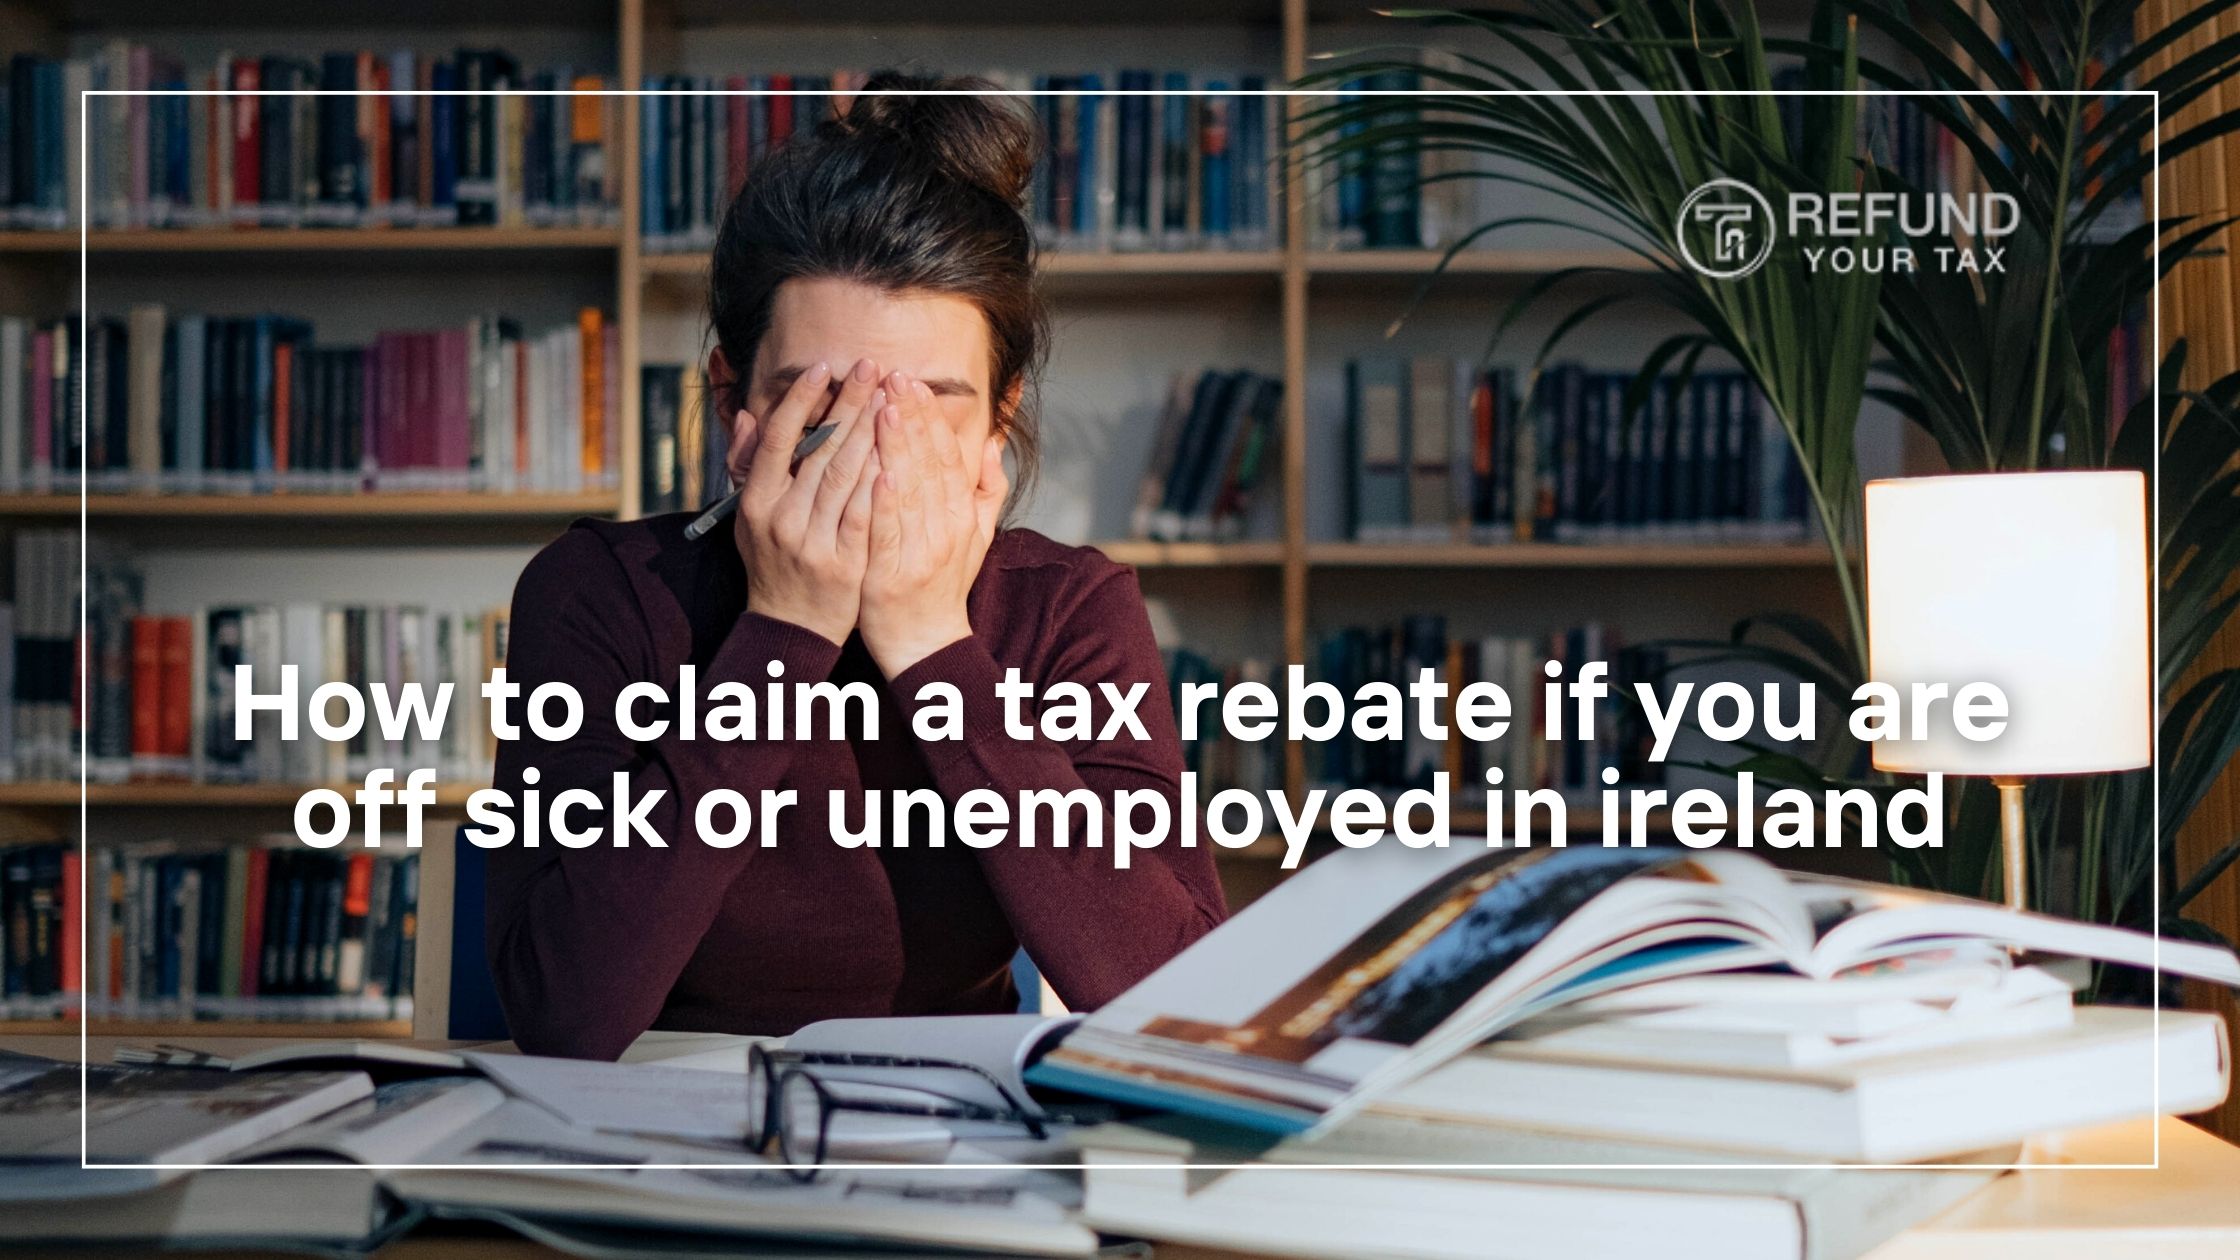 How to claim a tax rebate if you are off sick or unemployed in Ireland